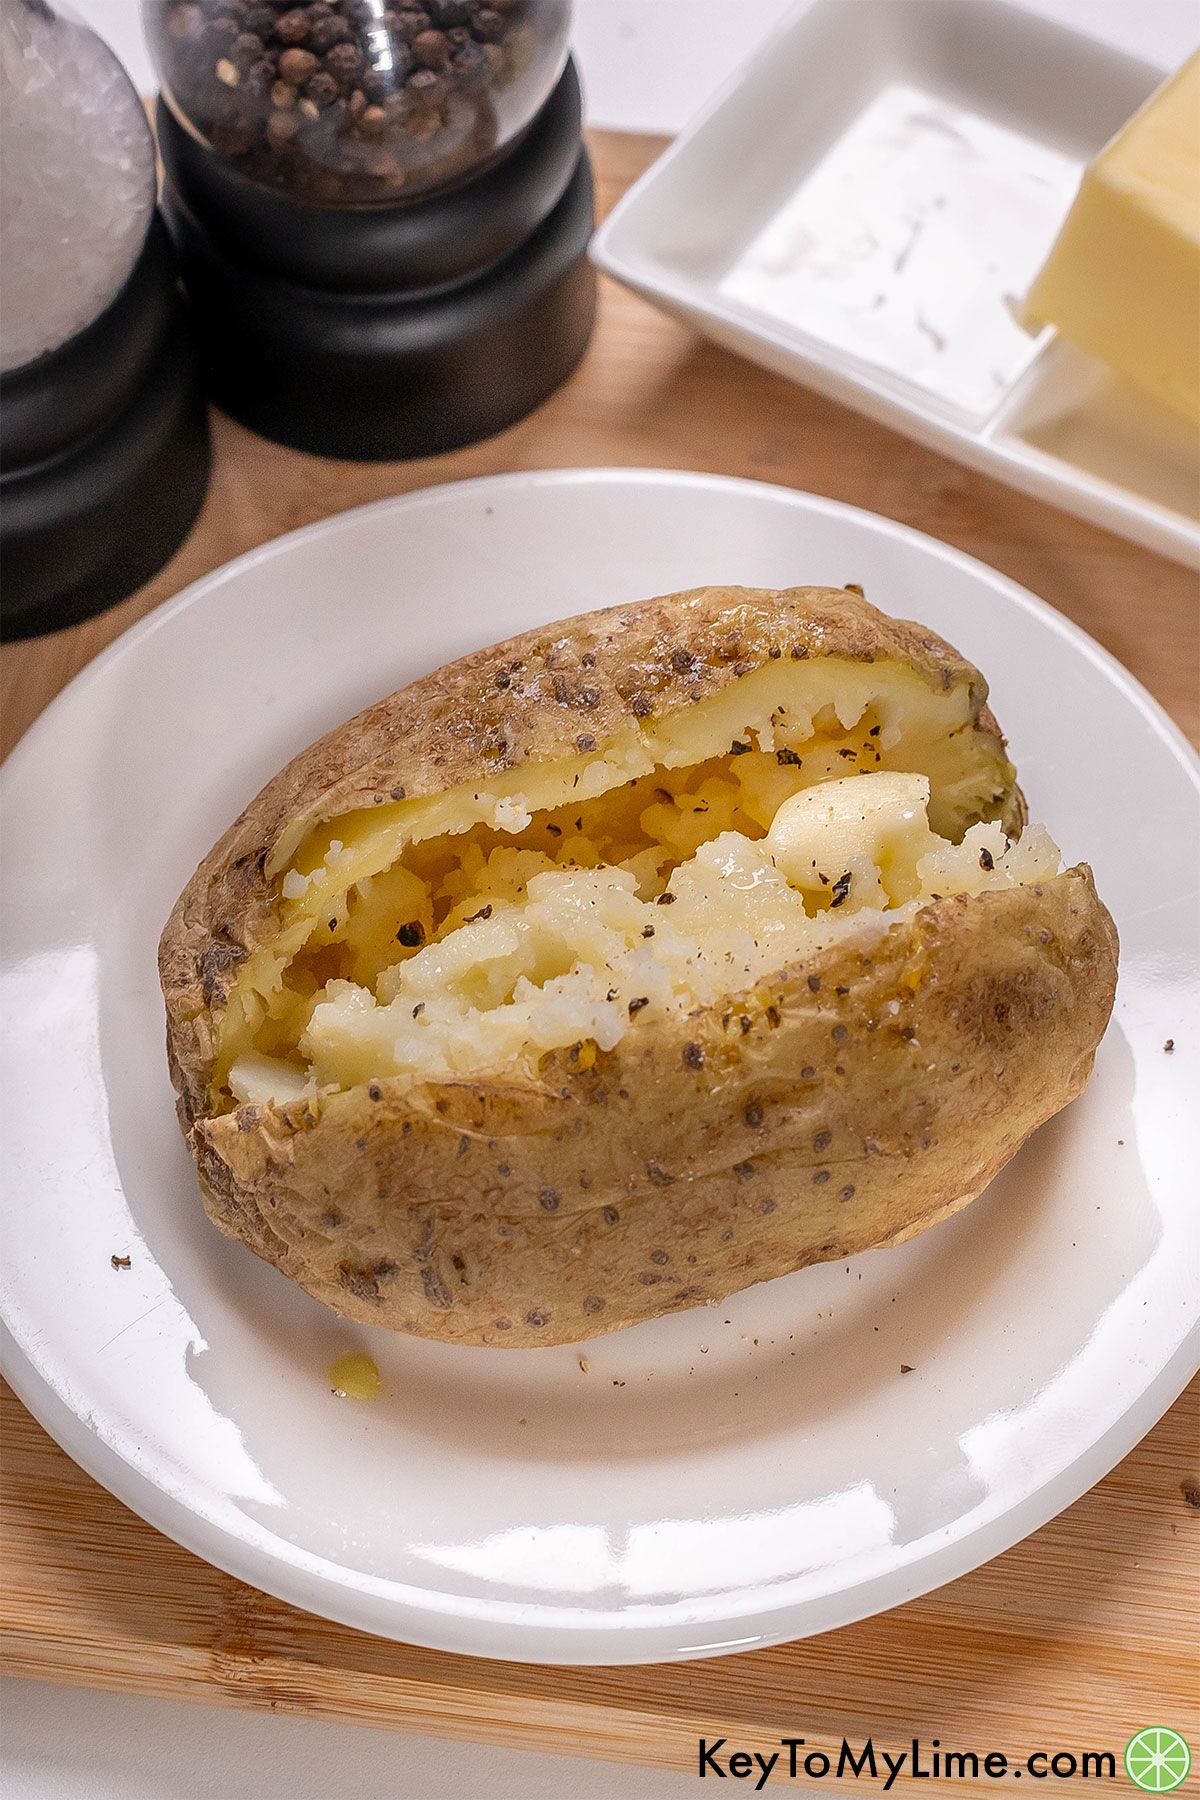 A close up image of a freshly cooked potato served with butter salt and pepper.